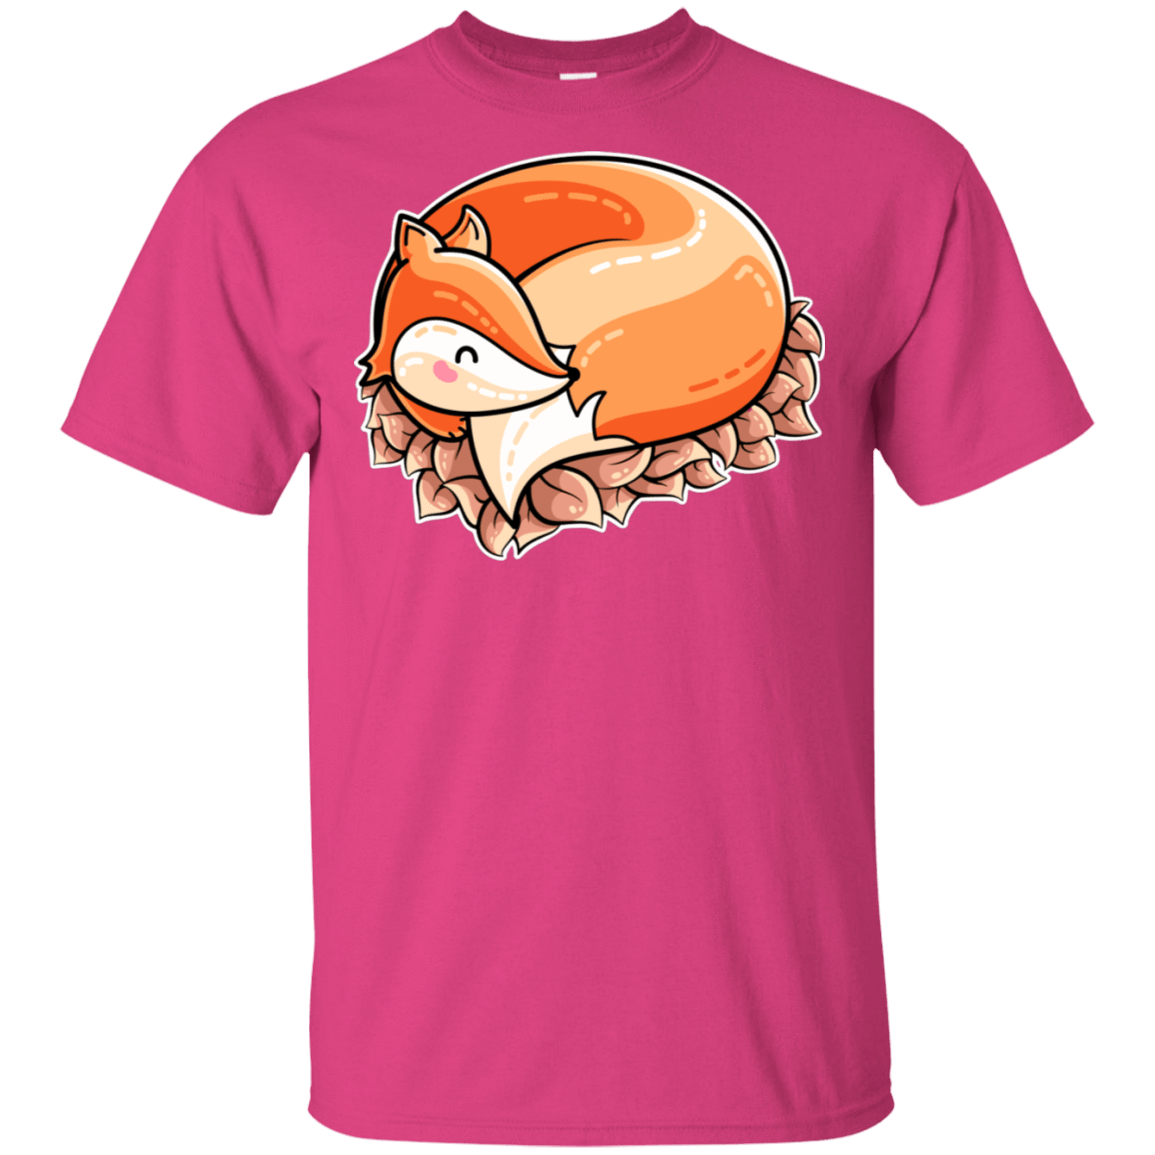 T-Shirts Heliconia / S Curled Fox T-Shirt